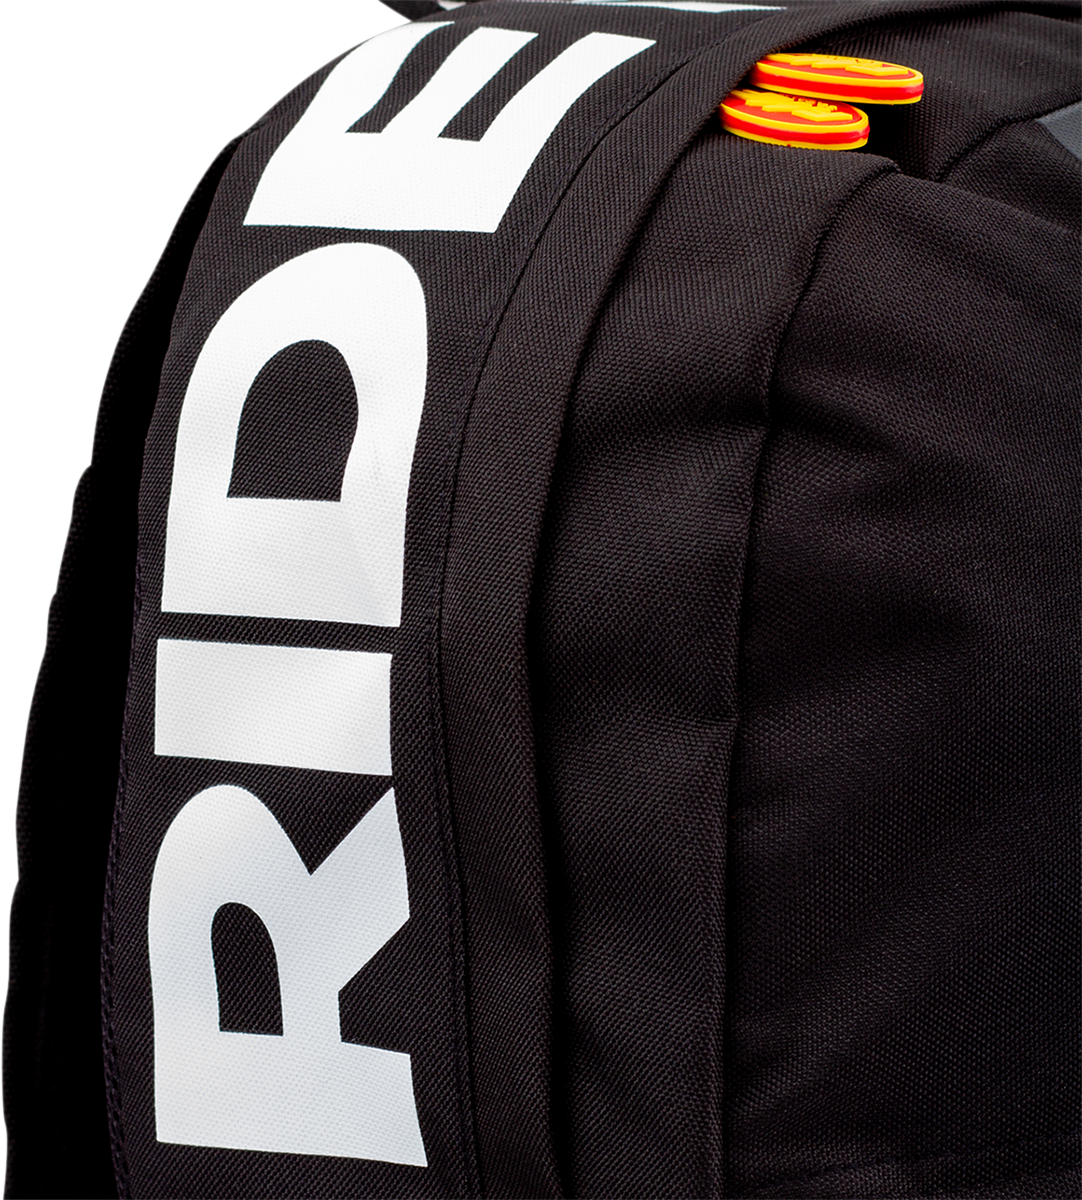 FMF APPAREL - BACKPACK FMF RIDE IT OUT - 843293111417